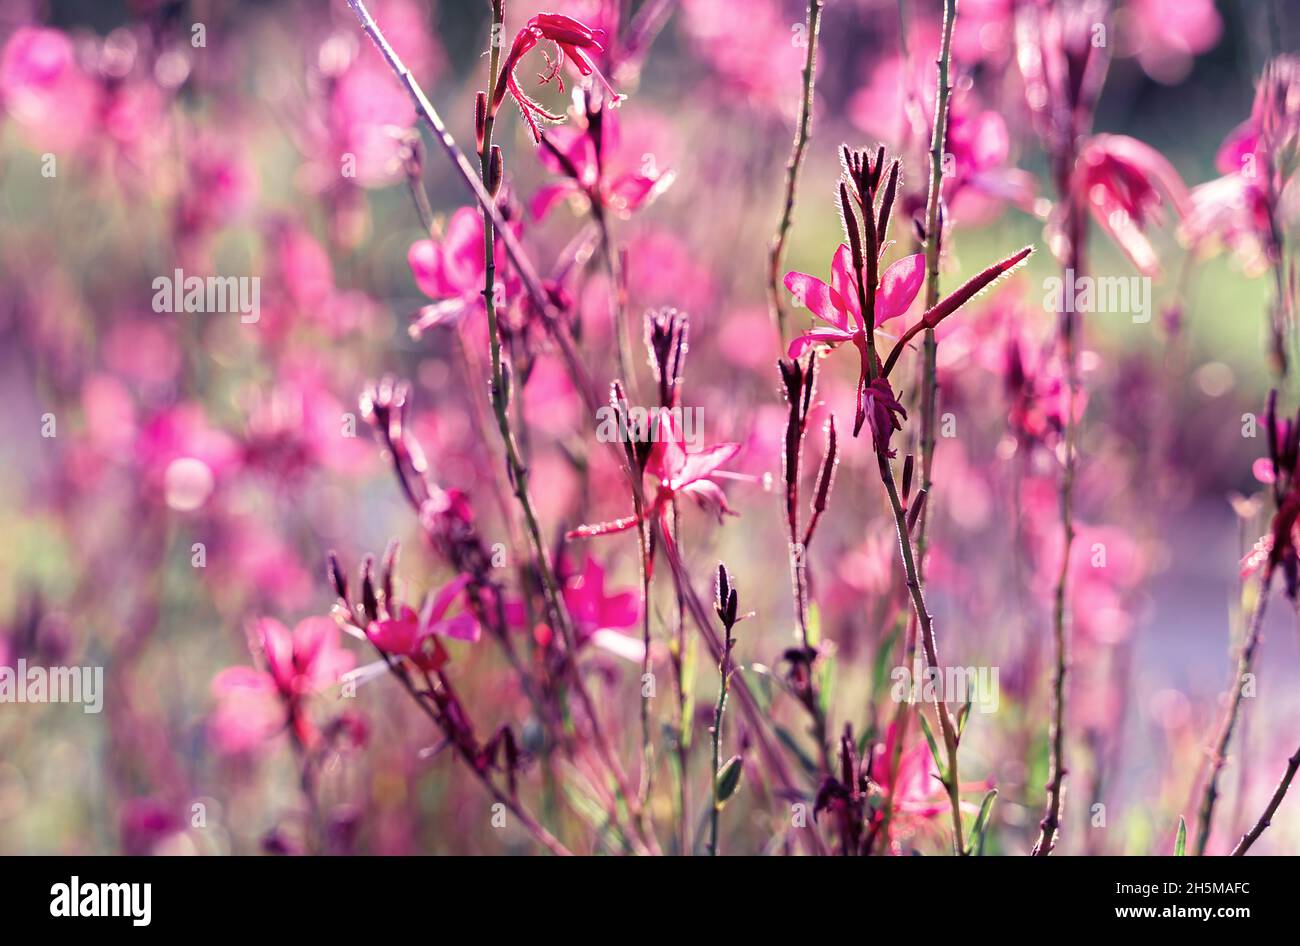 Beautiful wild flowers in the sunlight background. Shot with selective soft focus. Toned in mauve color. Gentle airy light natural art background. Stock Photo